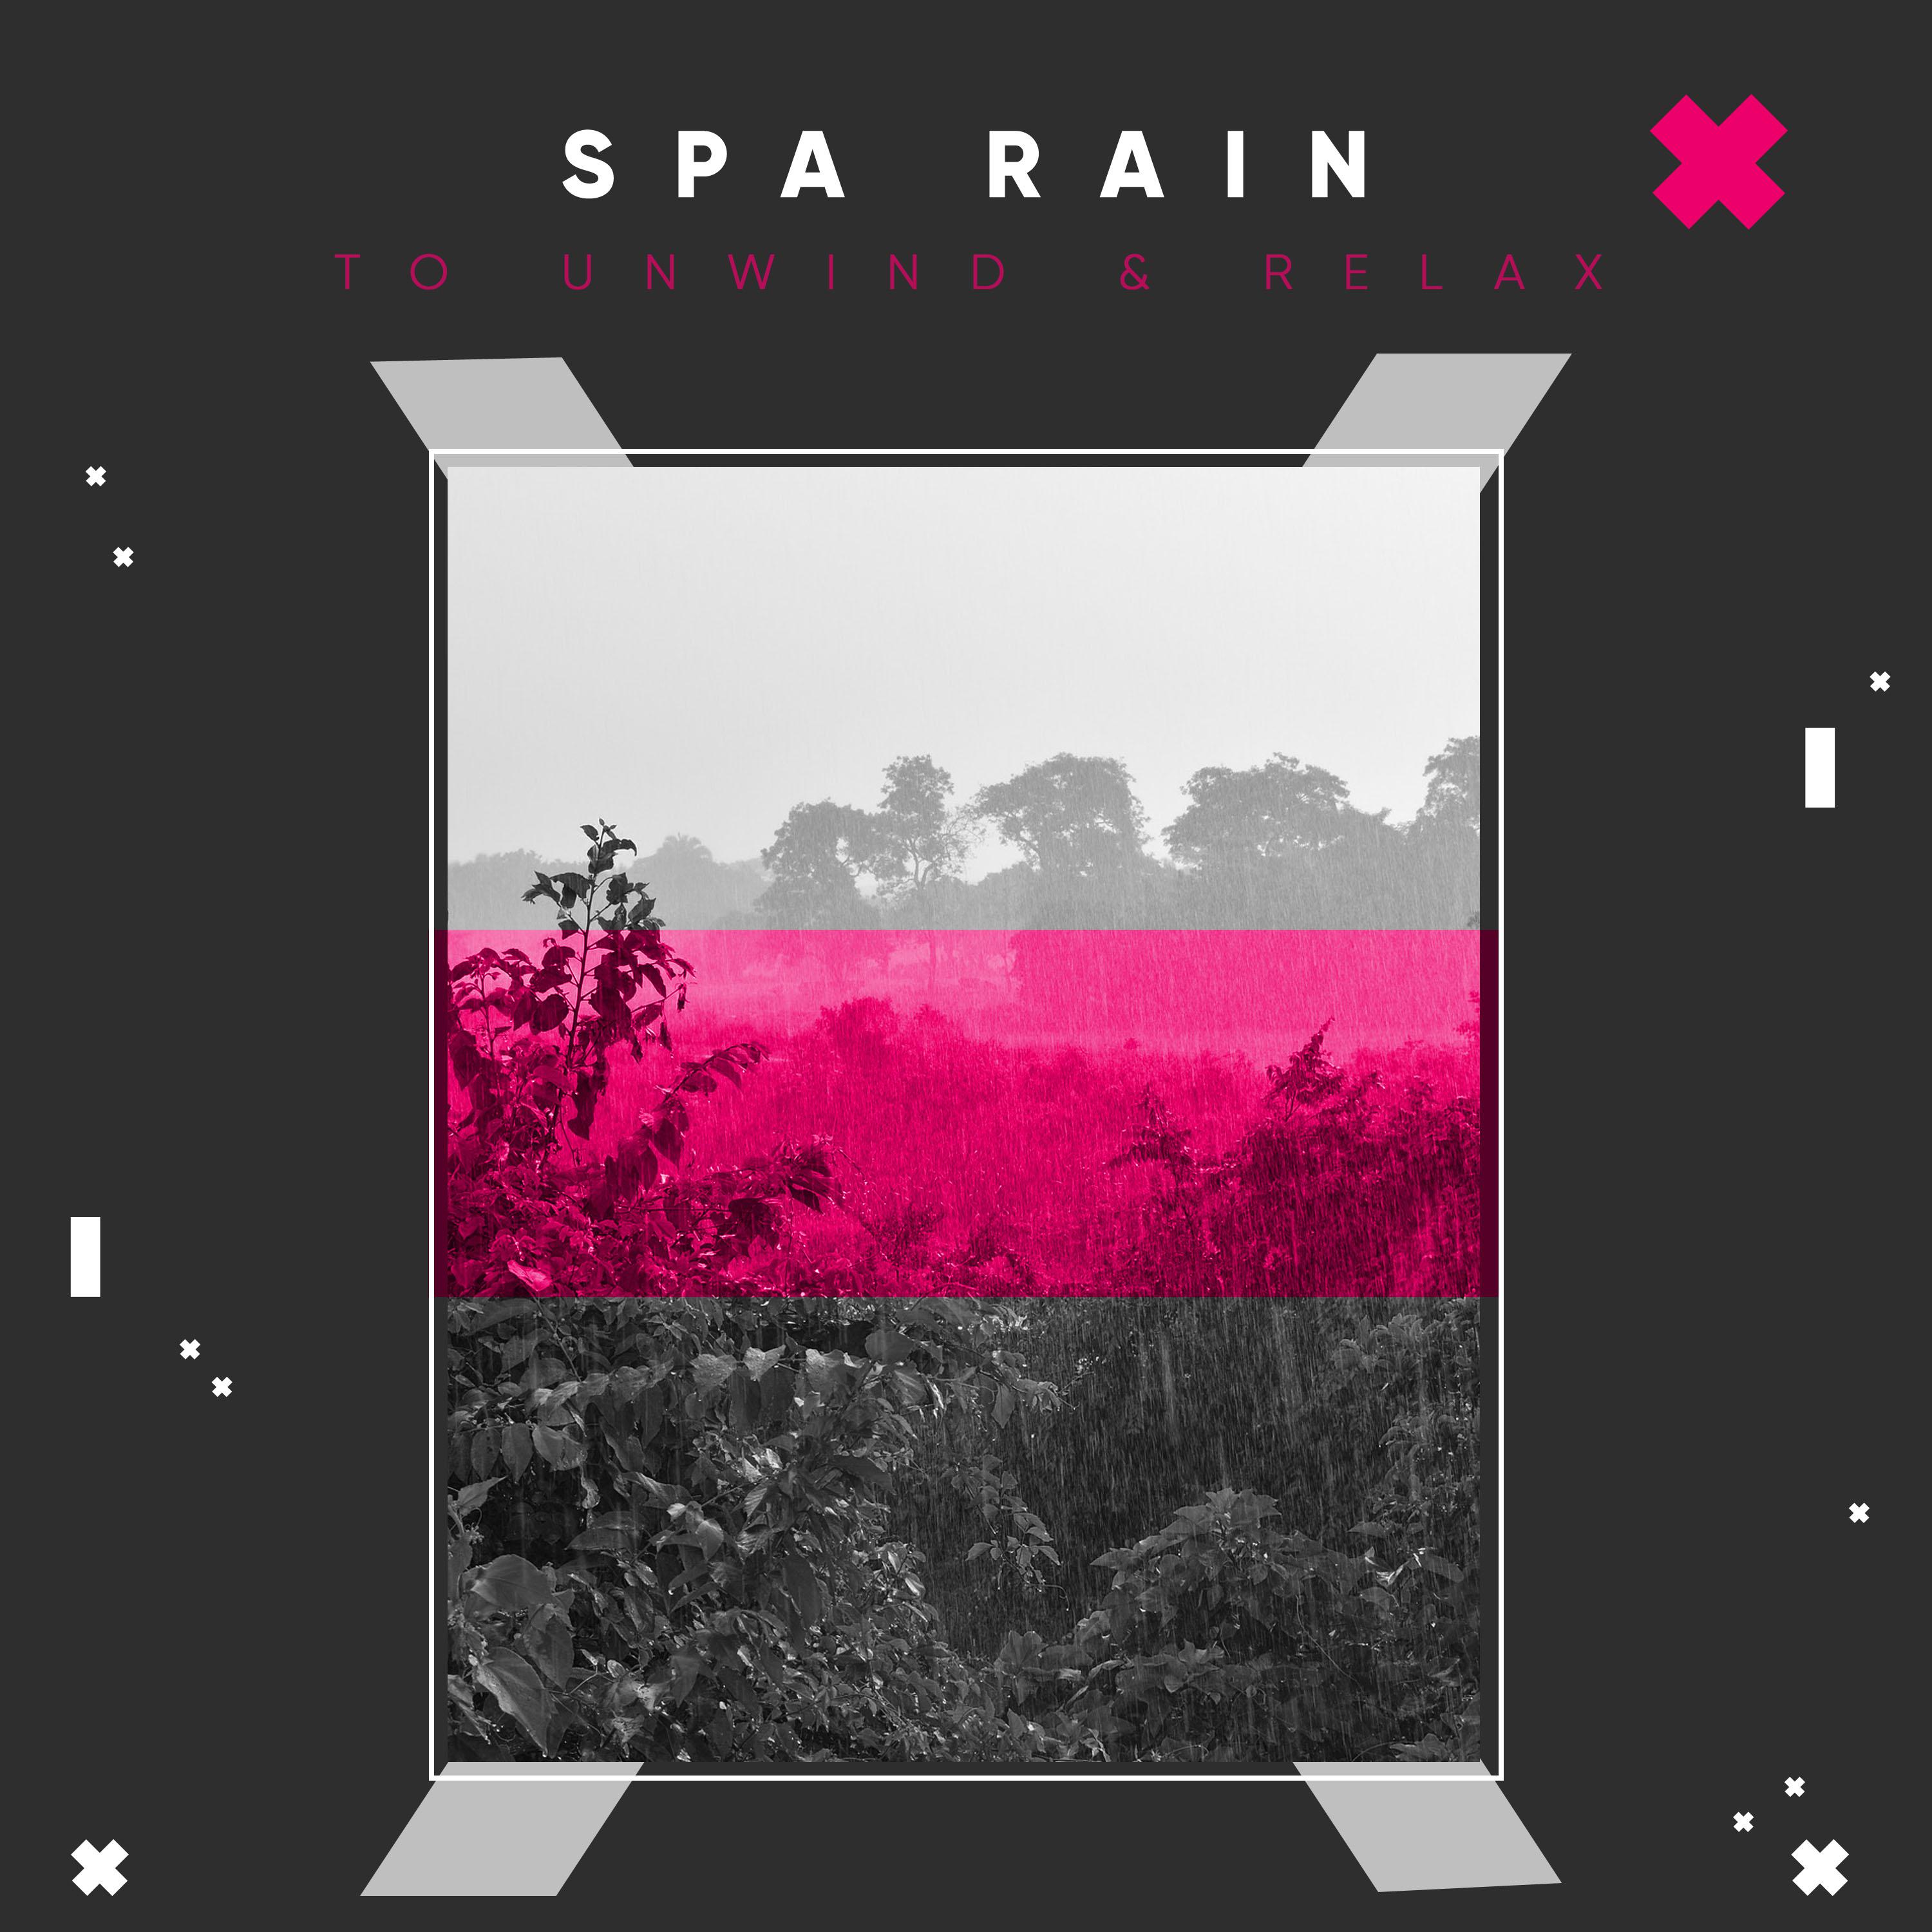 20 Spa Rain Storms to Unwind & Relax